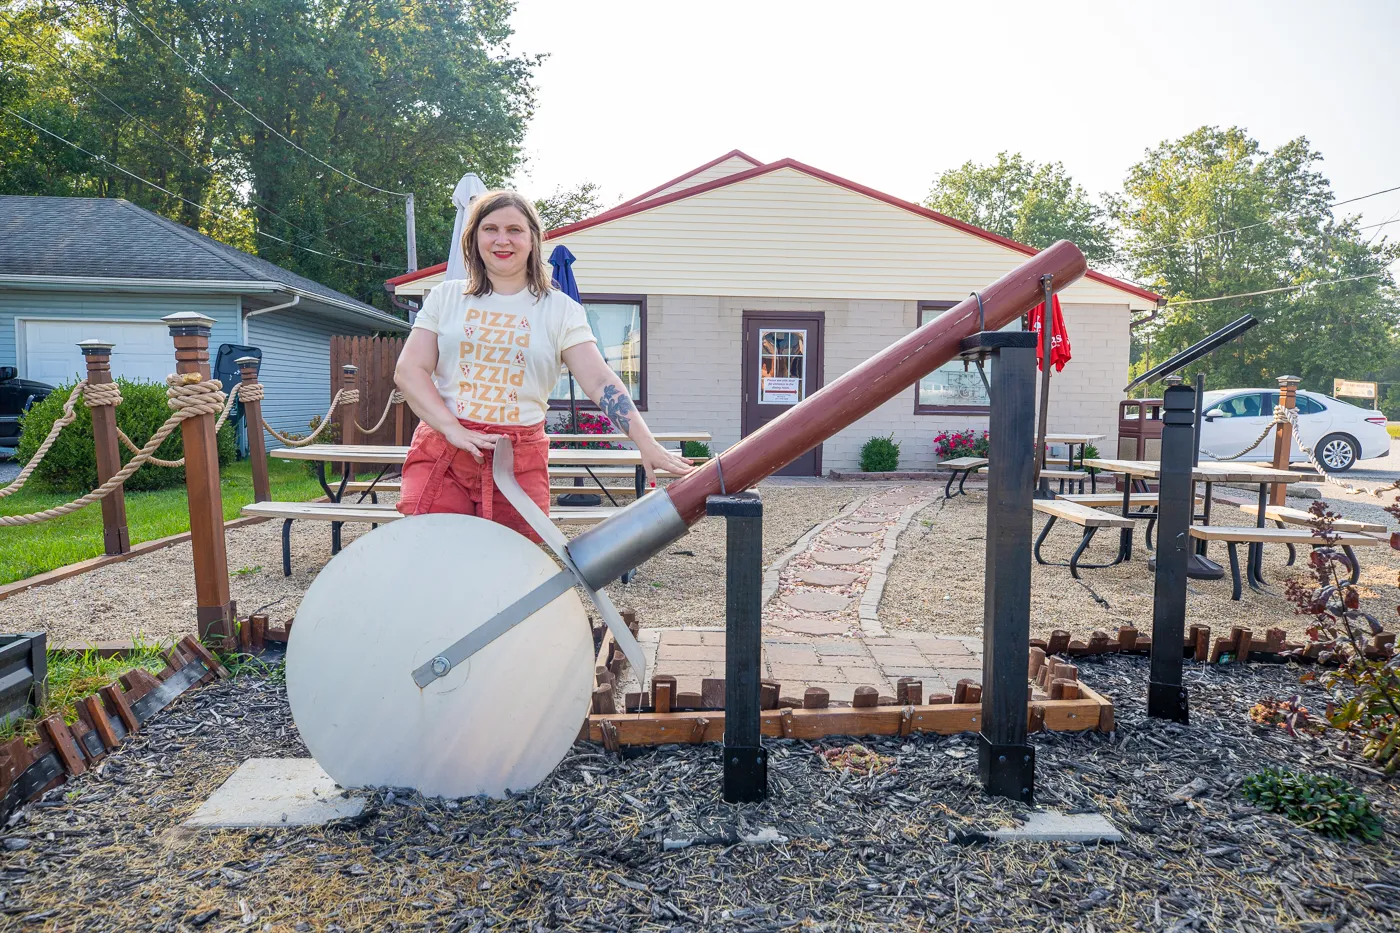 Big Pizza Slicer at Greathouse of Pizza in Casey, Illinois